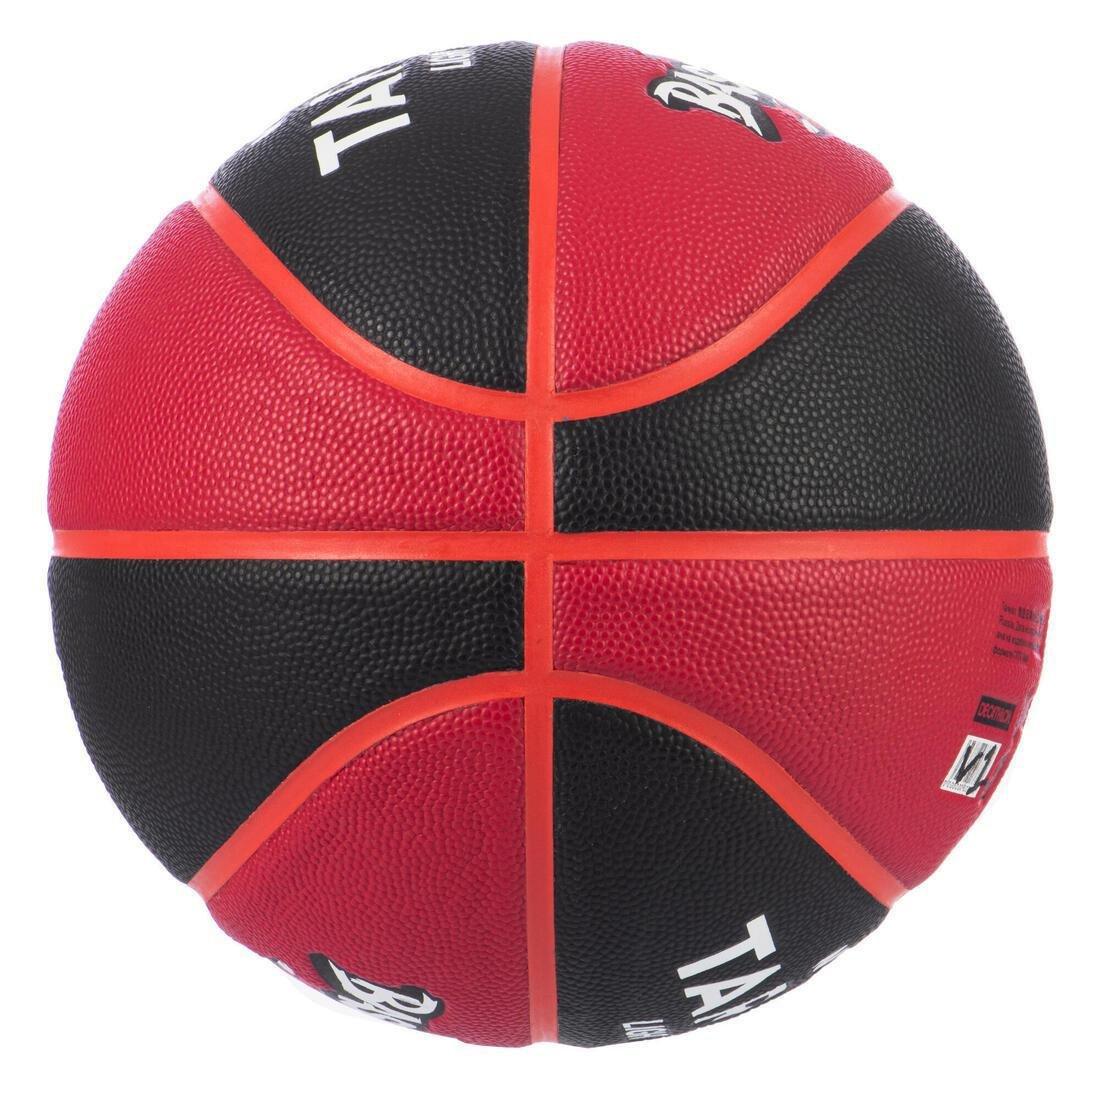 TARMAK - Kids Size 5 (Up To 10 Years) Basketball Wizzy, Multicolour